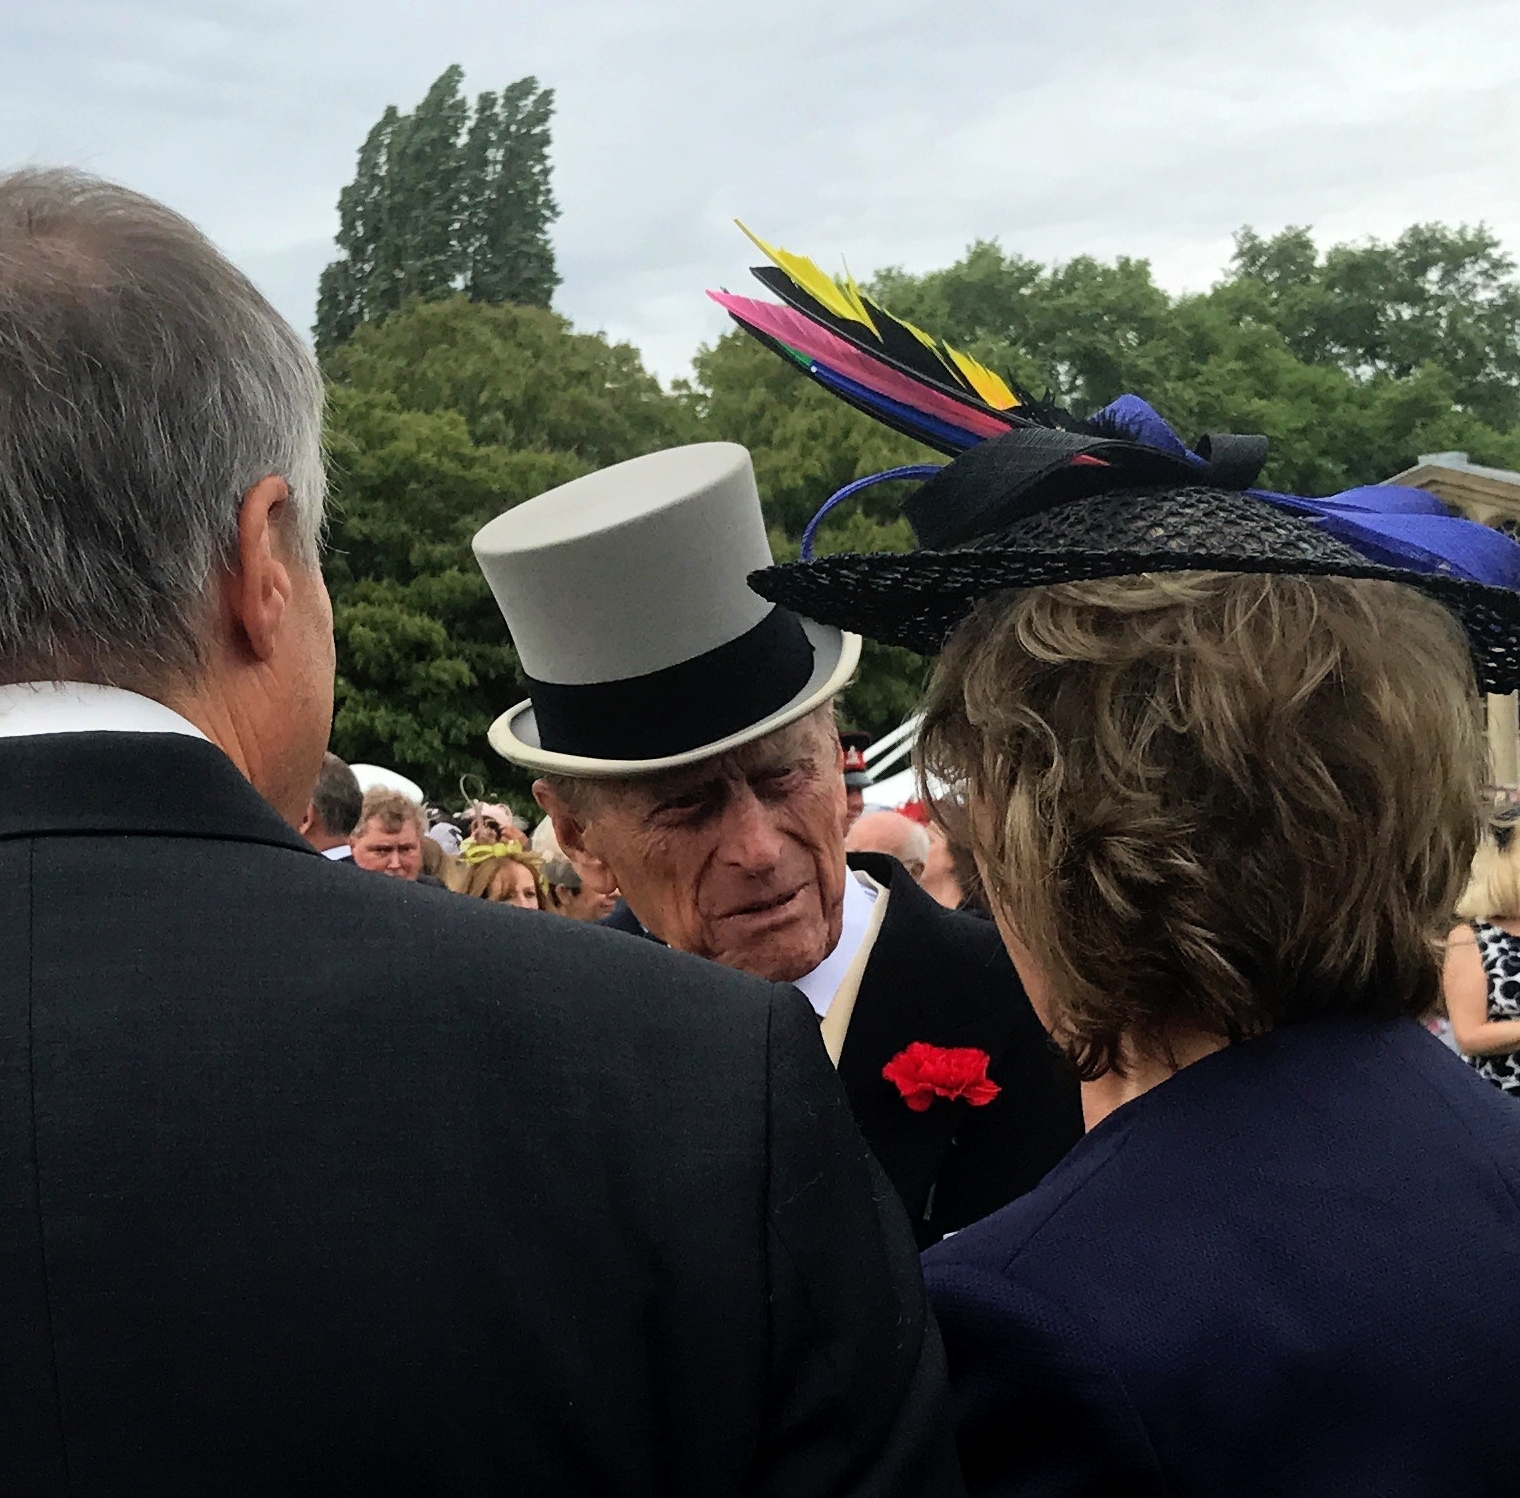 Angus and Fiona Macaskill speaking to Prince Philip at a Buckingham Palace garden party in 2017. Angus has based his painting on this photo 